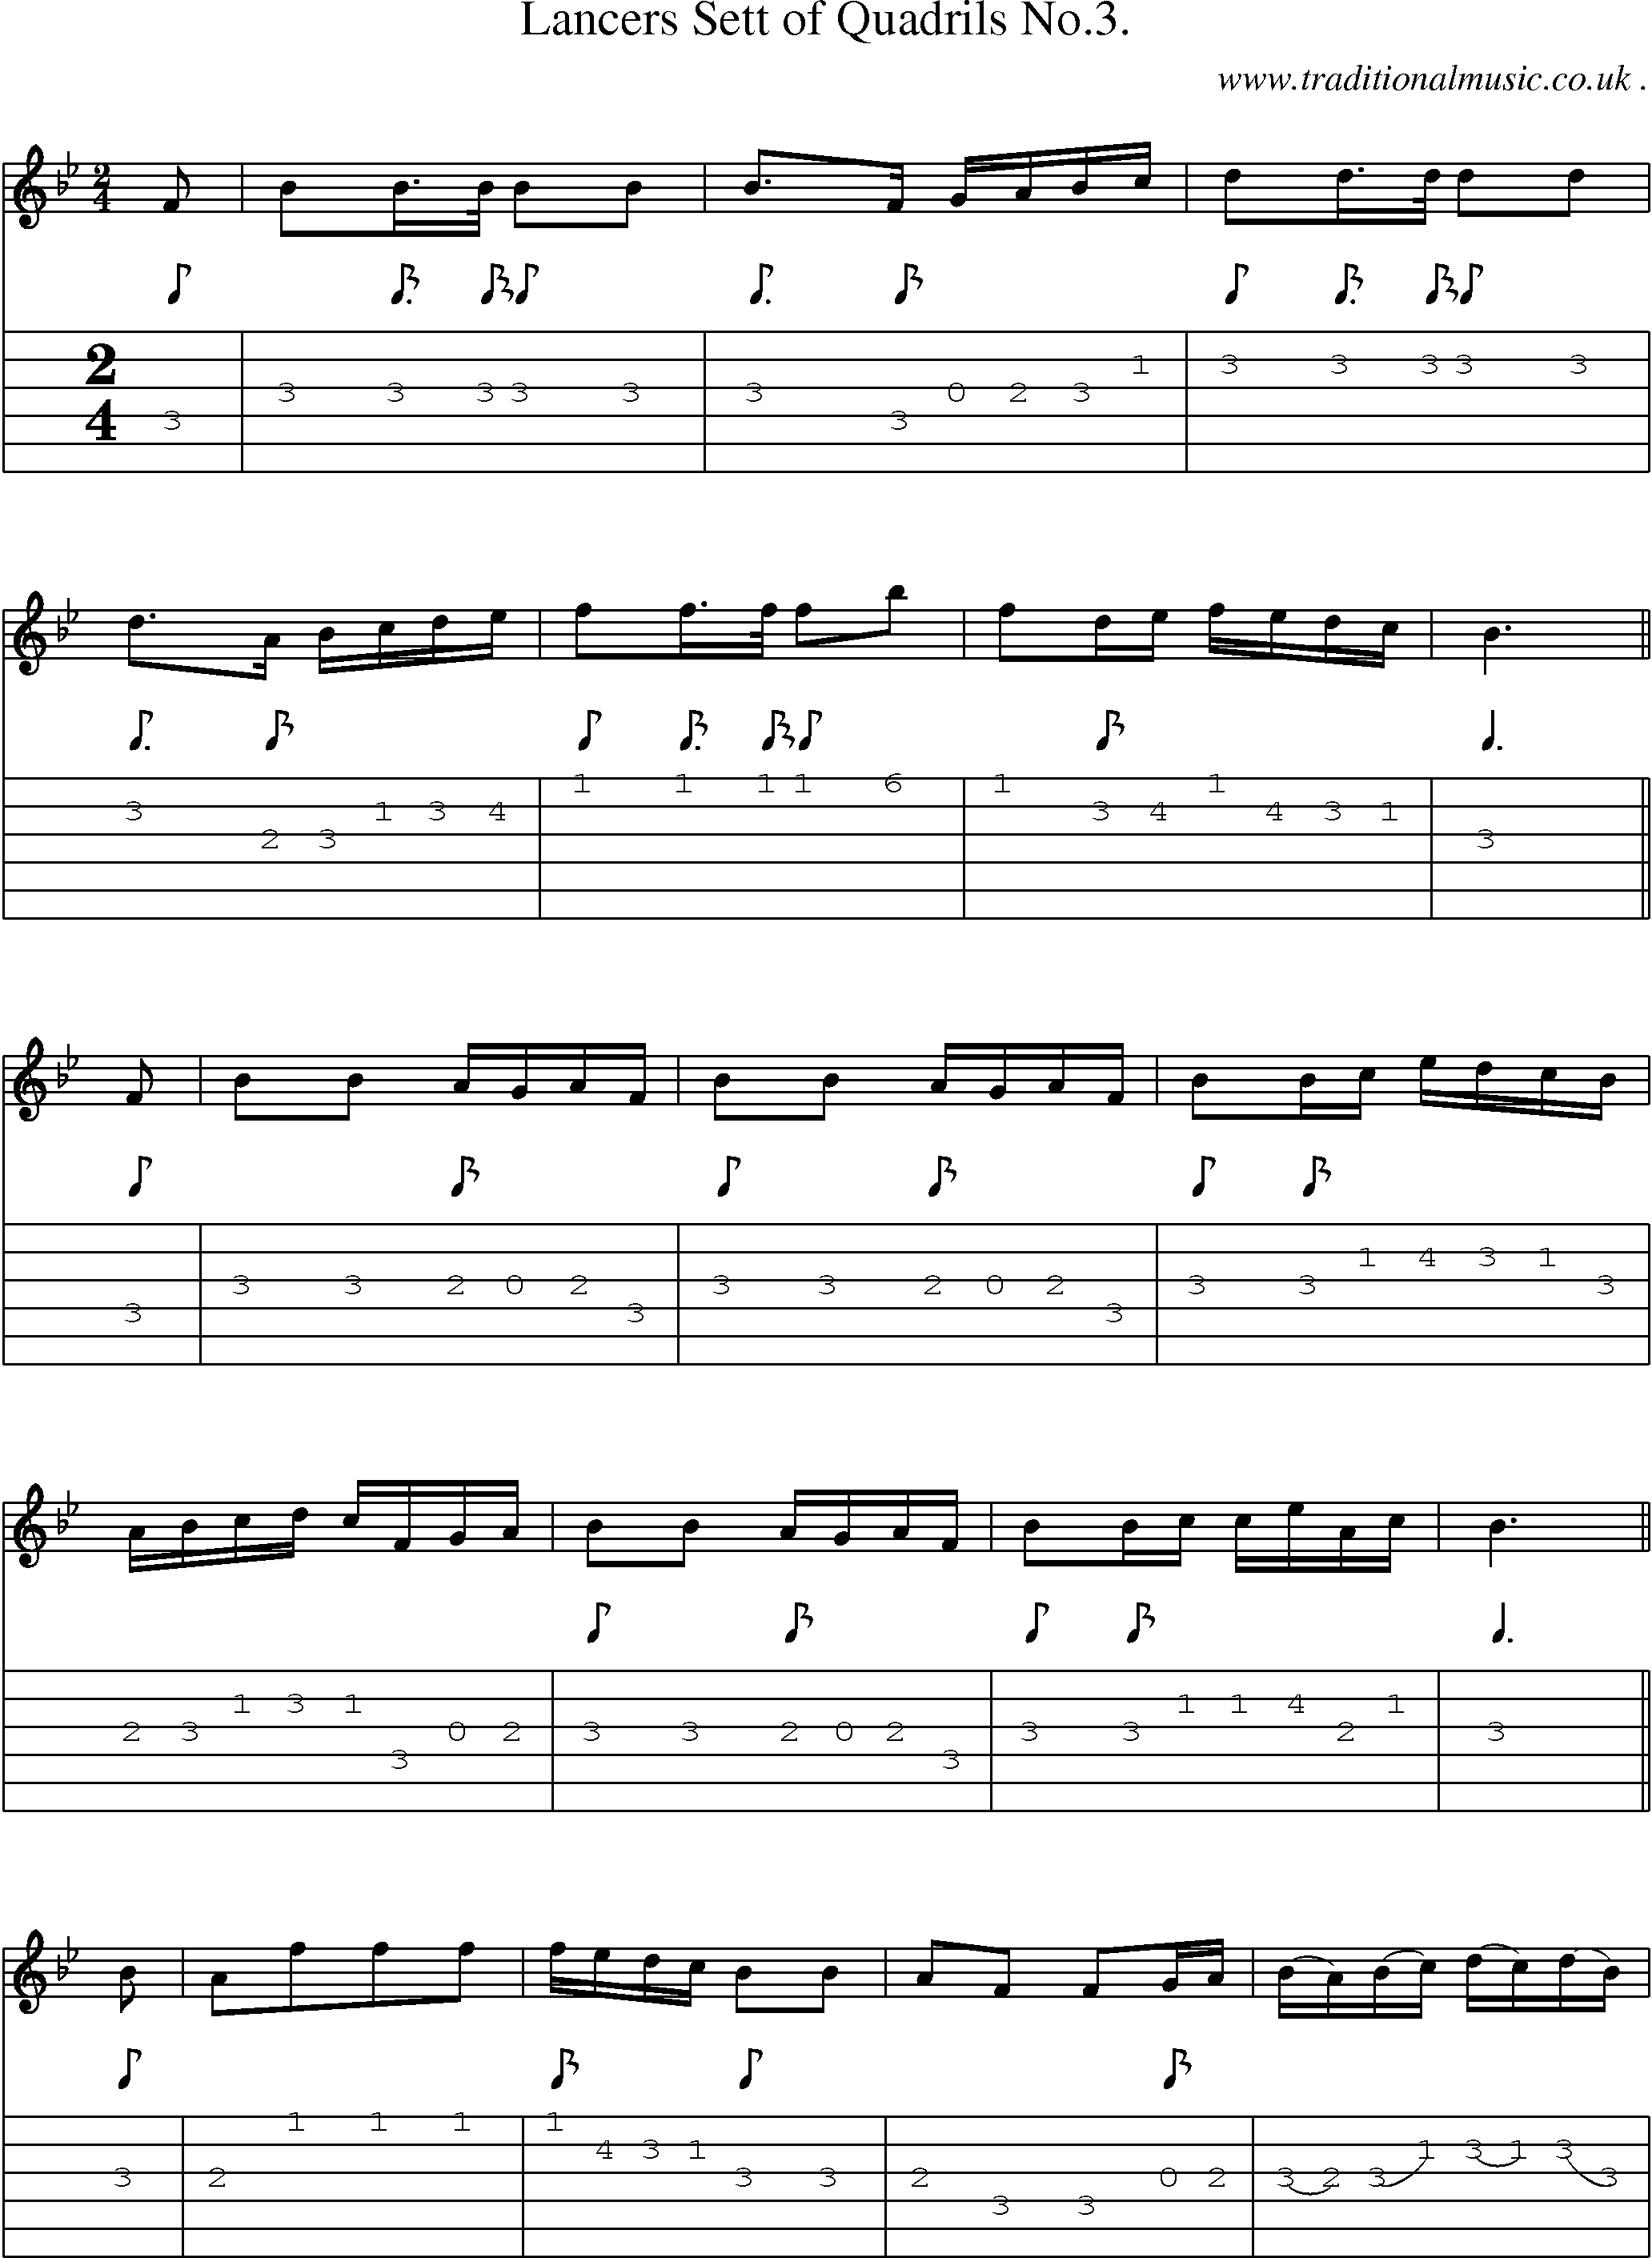 Sheet-Music and Guitar Tabs for Lancers Sett Of Quadrils No3